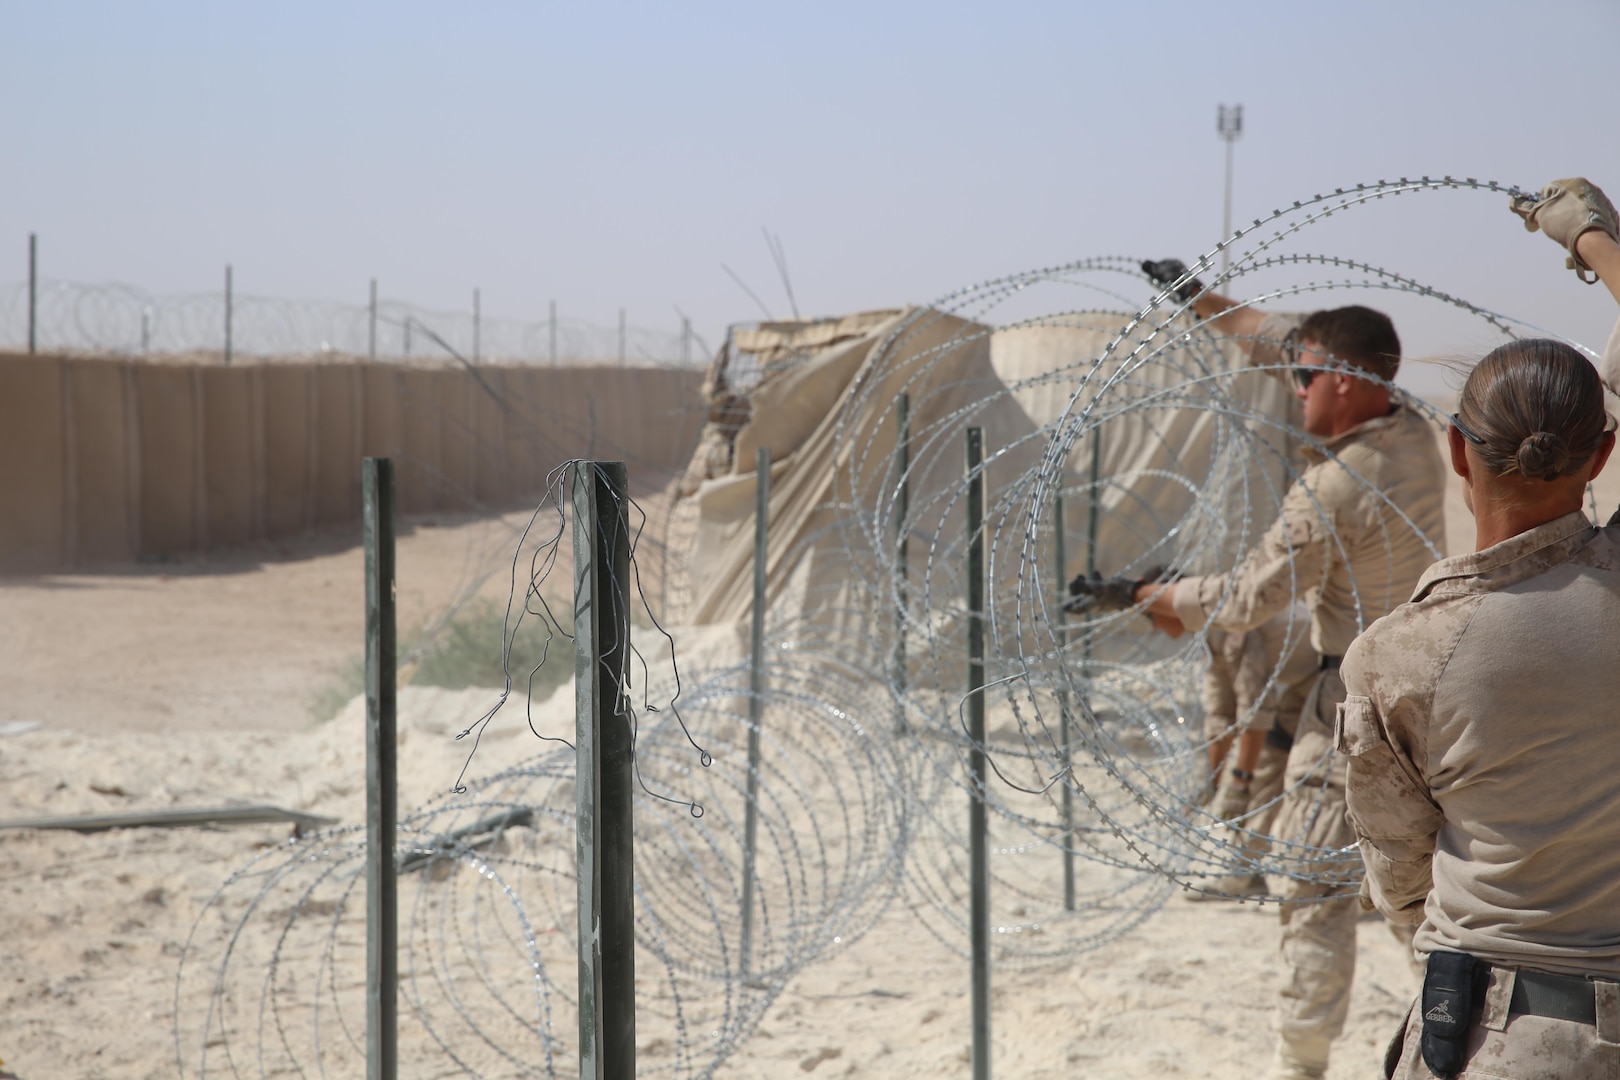 U.S. Marine Corps Cpl. Bridget Bastian and Lance Cpl. Jonathan Fer, both combat engineers attached to Task Force Al Asad with Marine Wing Support Squadron (MWSS) 372 ,Special Purpose Marine Air-Ground Task Force-Crisis Response-Central Command, improve force protection measures by laying concertina wire at Al Asad Air Base, Iraq, July 6, 2017. The Marines of the Engineering Detachment work daily on a variety of engineer tasks in support of the master base plan for Task Force Al Asad. Task Force Al Asad’s mission is to advise and assist  and build partner capacity with the Iraqi Security Forces in Al Anbar province in support of Combined Joint Task Force-Operation Inherent Resolve, the global coalition to defeat ISIS in Iraq and Syria. (U.S. Marine Corps photo by 1st Lt. Dave Williams)